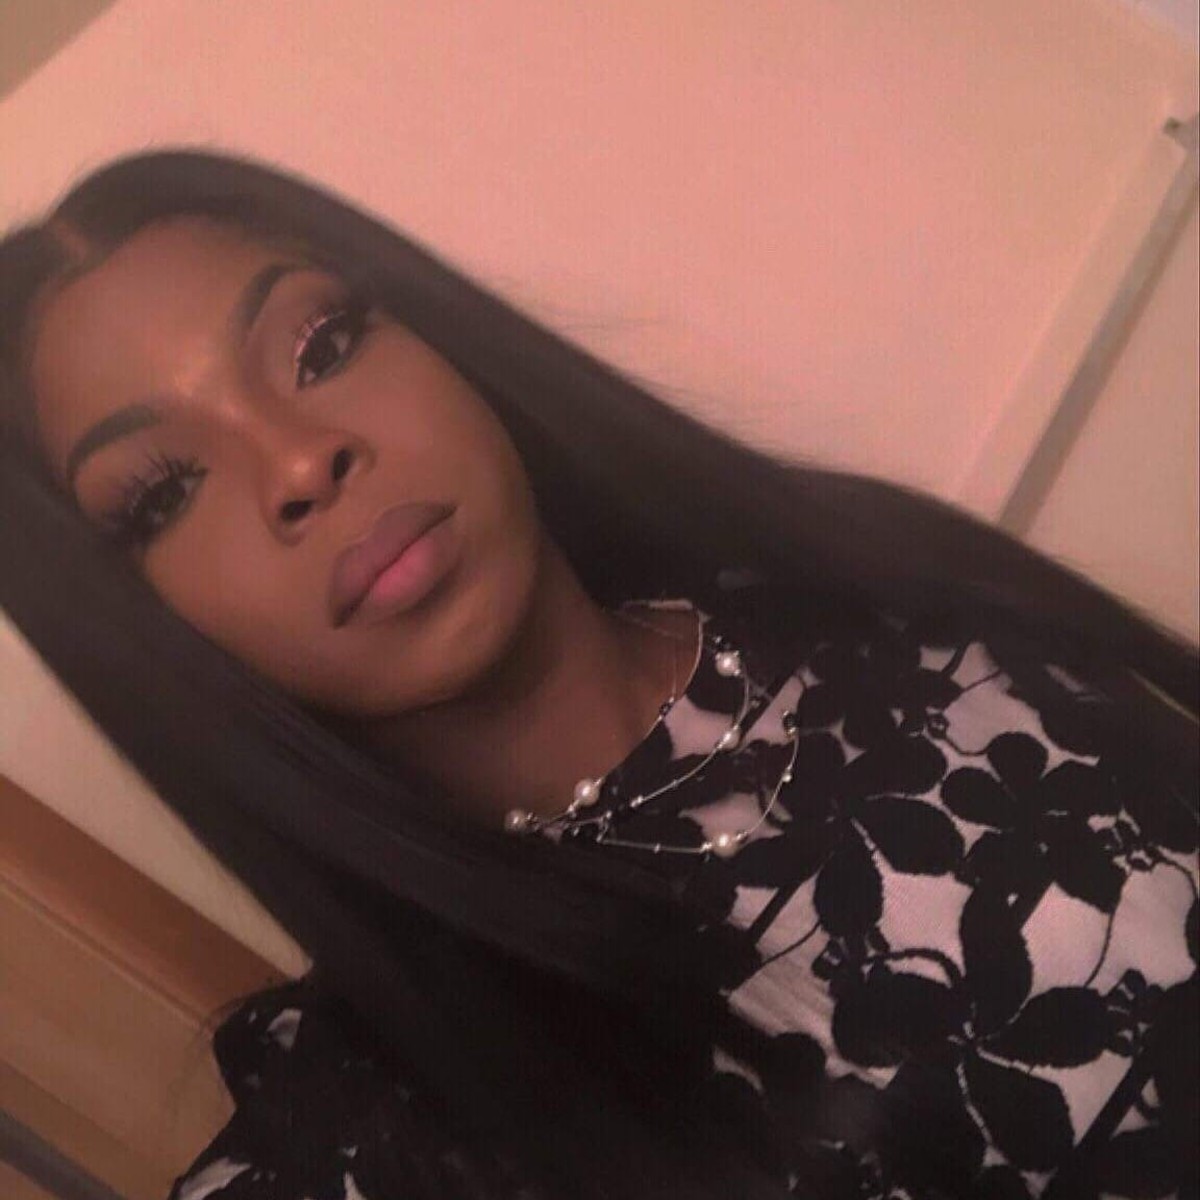 Muhlaysia Booker, a black transgender woman, was found dead on Sunday, May 19th, 2019.